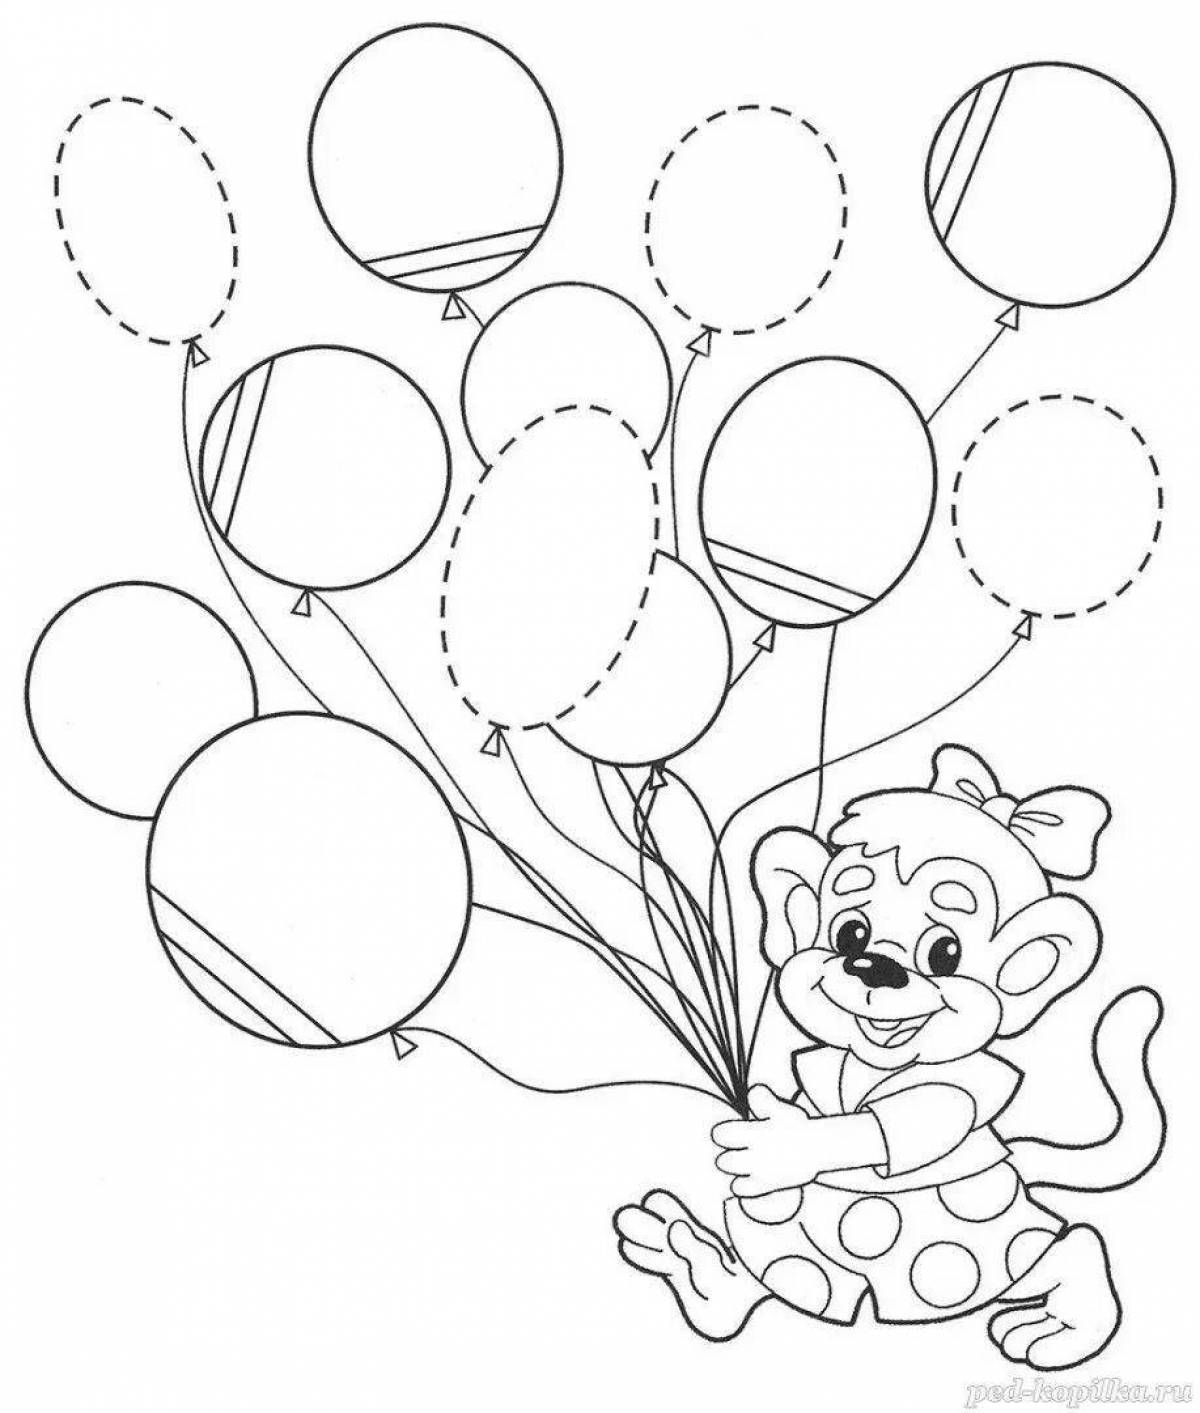 Crazy ball coloring page for 4-5 year olds